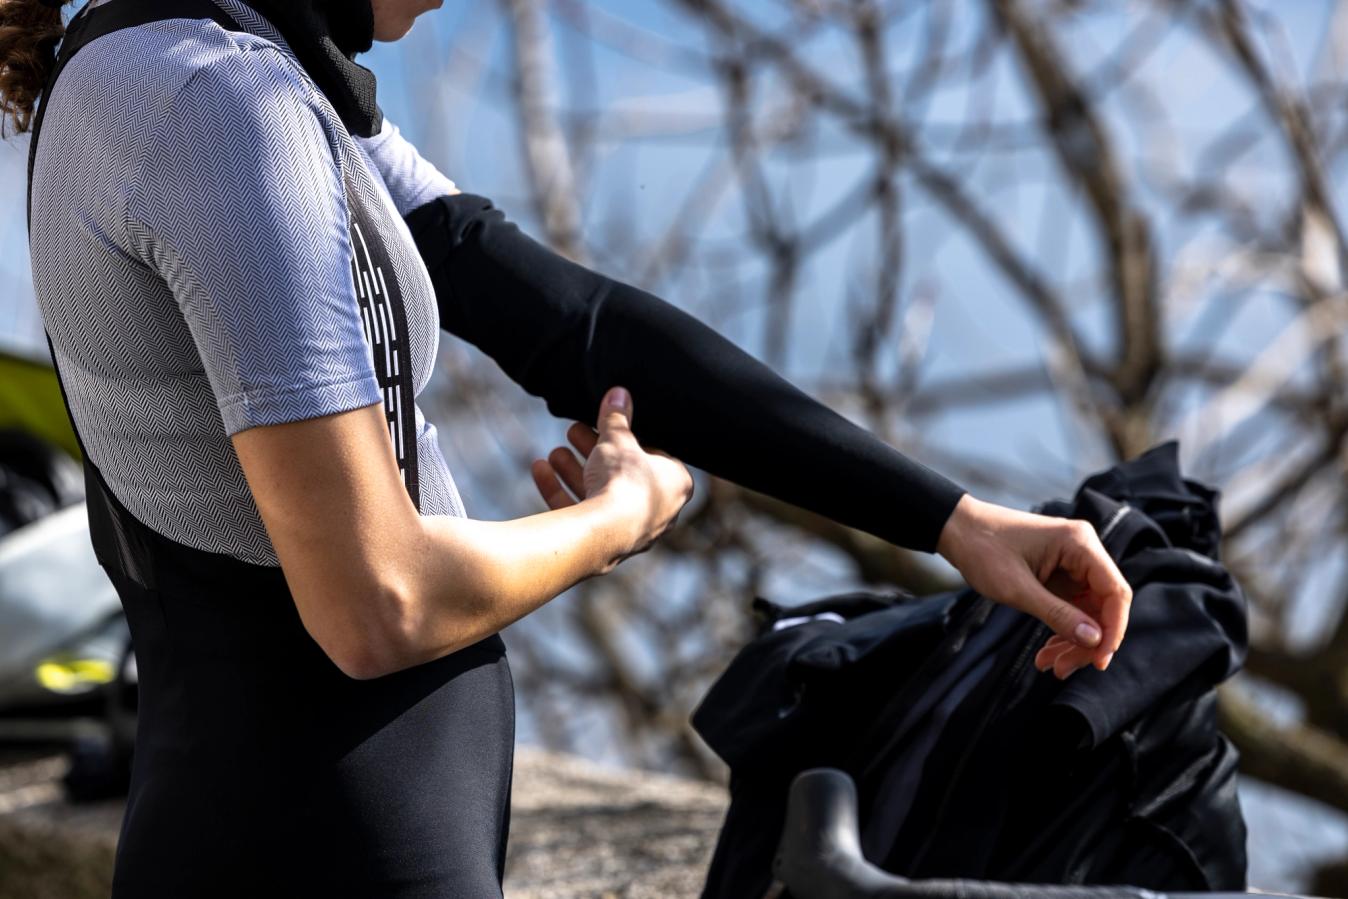 Competing the range is a series of clothing accessories including thermal leg and arm warmers, and long and short sleeve base layers